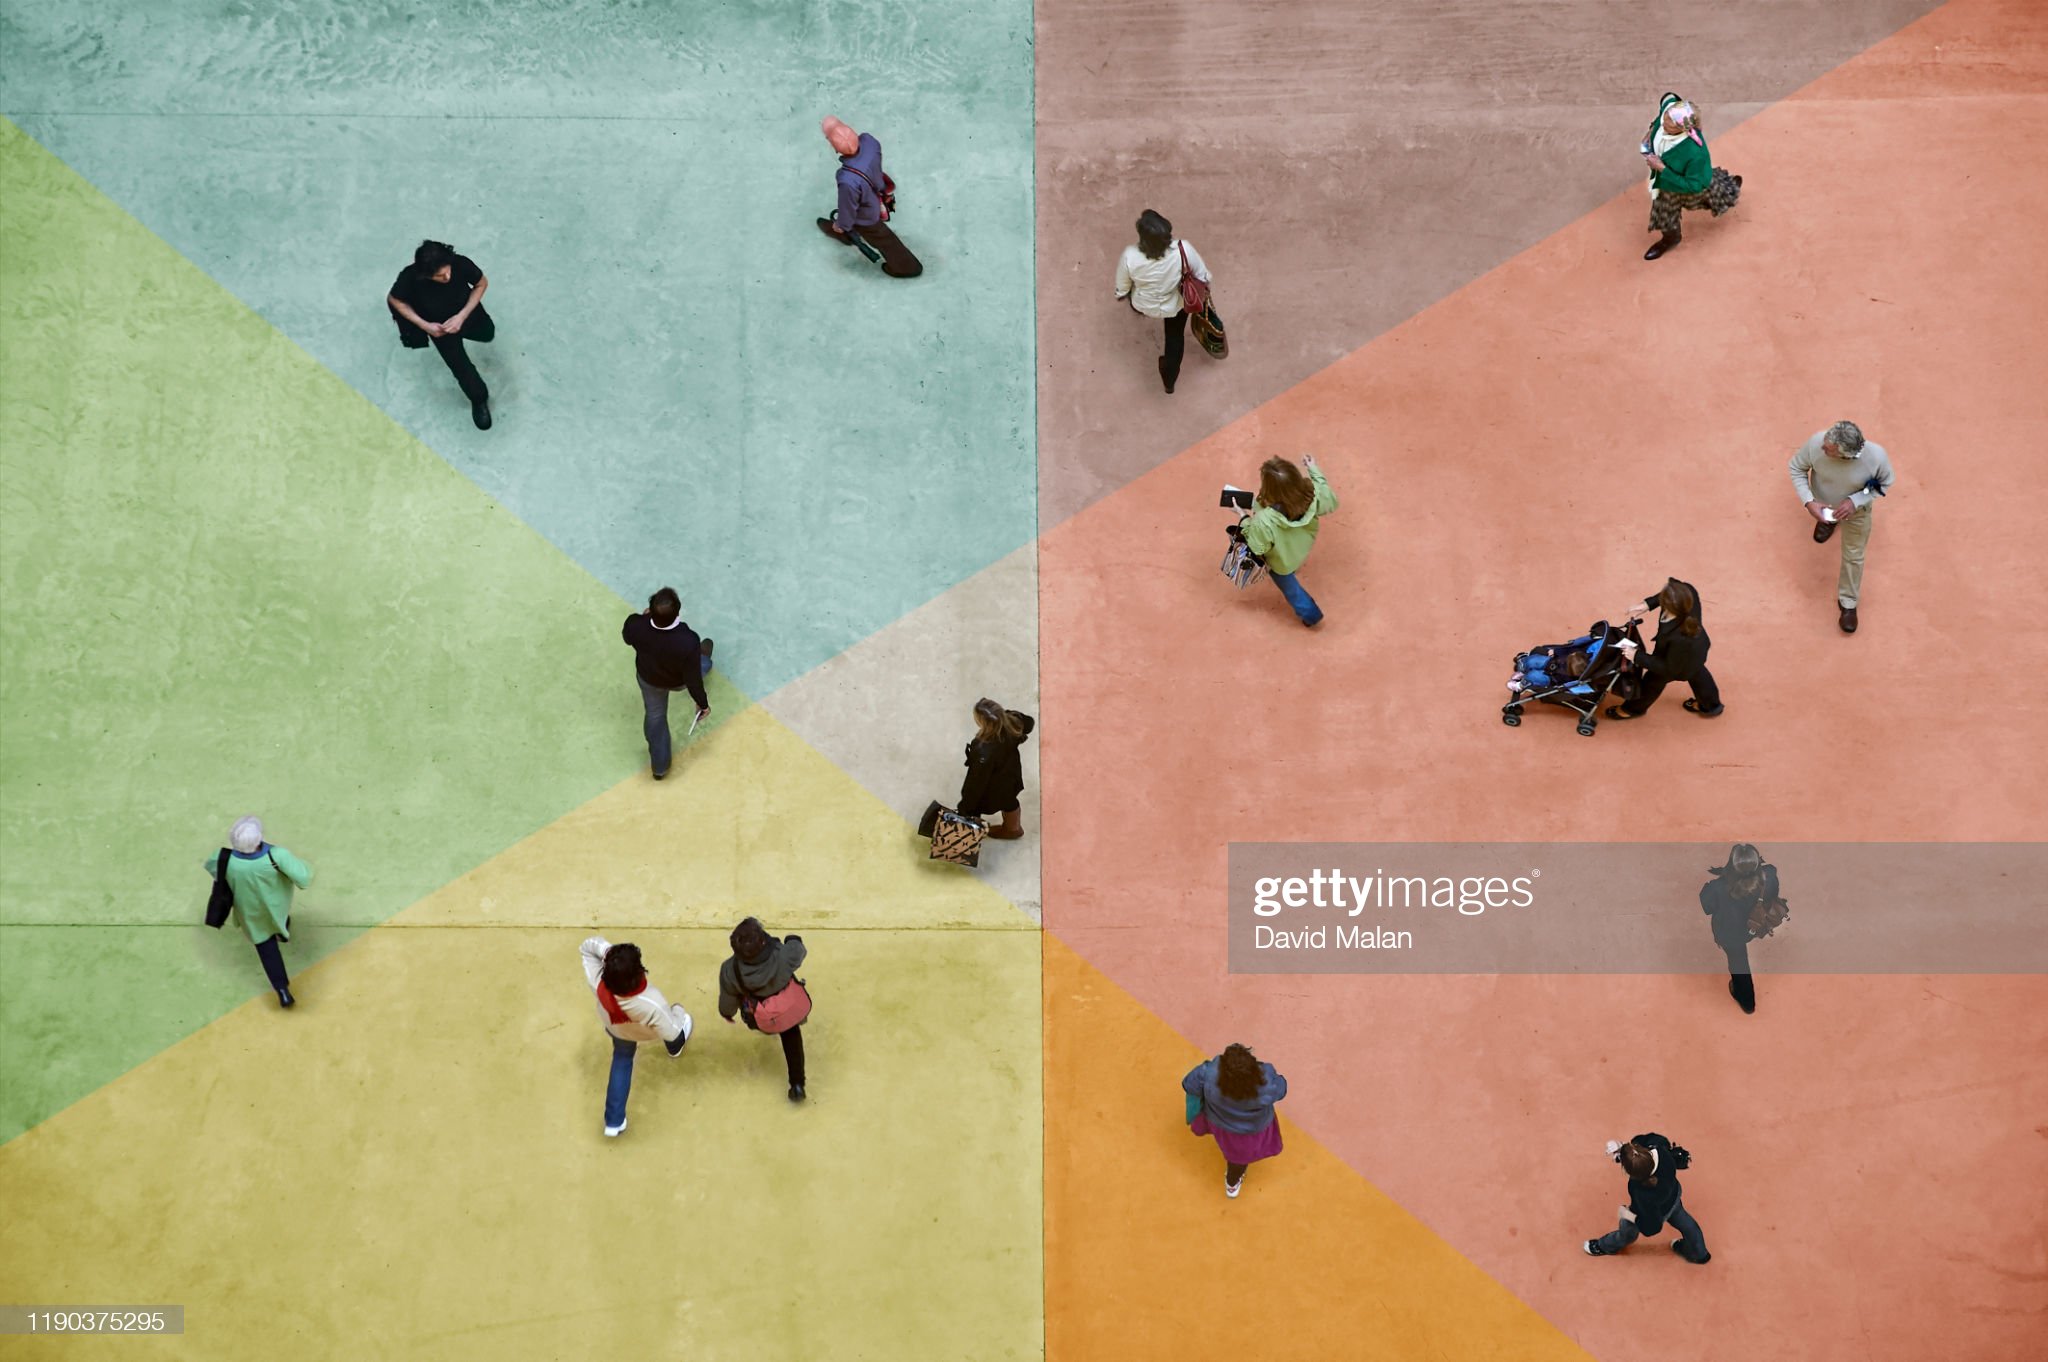 gettyimages-1190375295-2048x2048